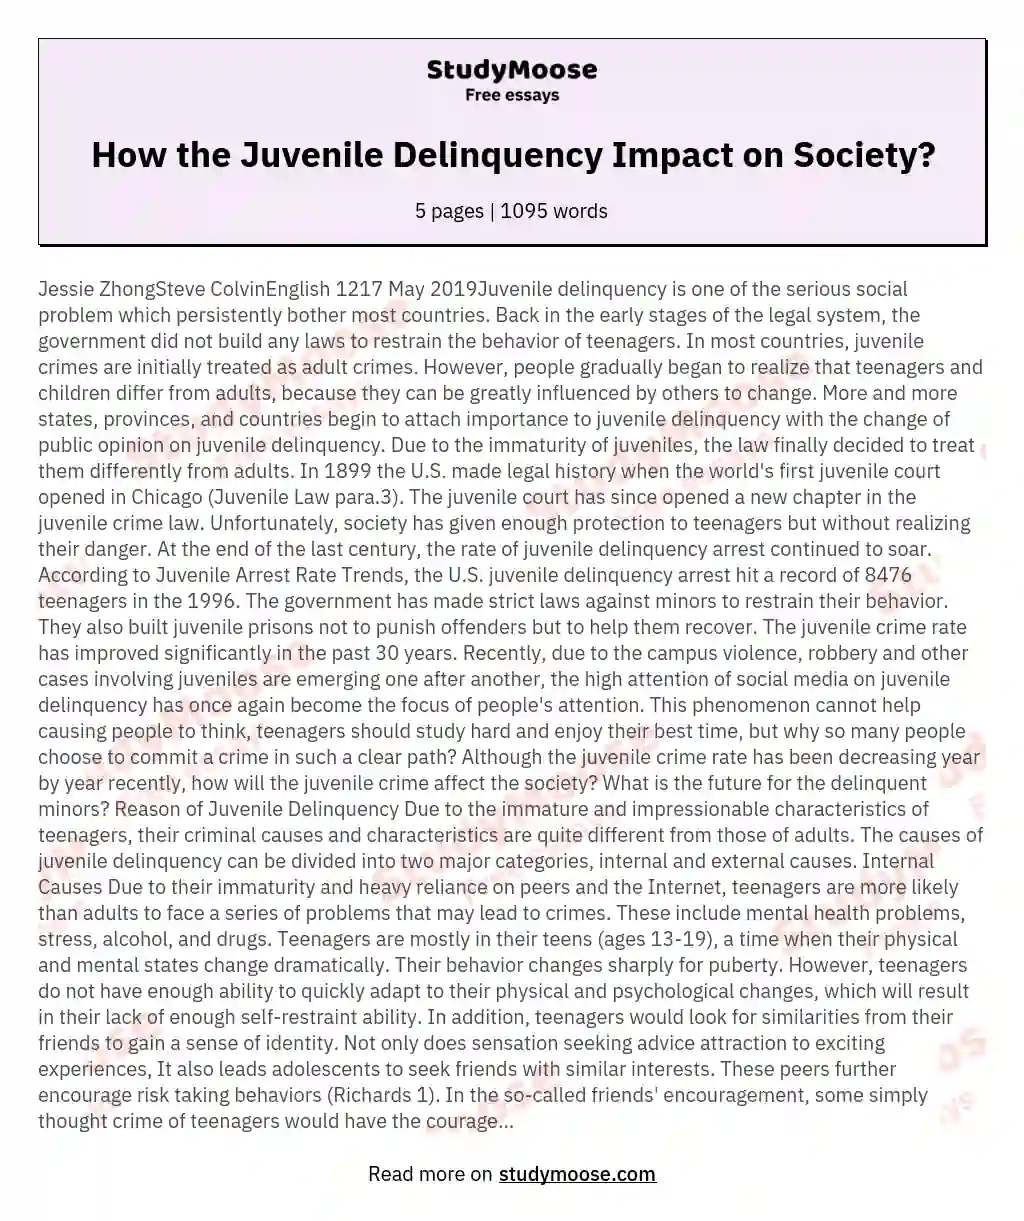 How the Juvenile Delinquency Impact on Society? essay